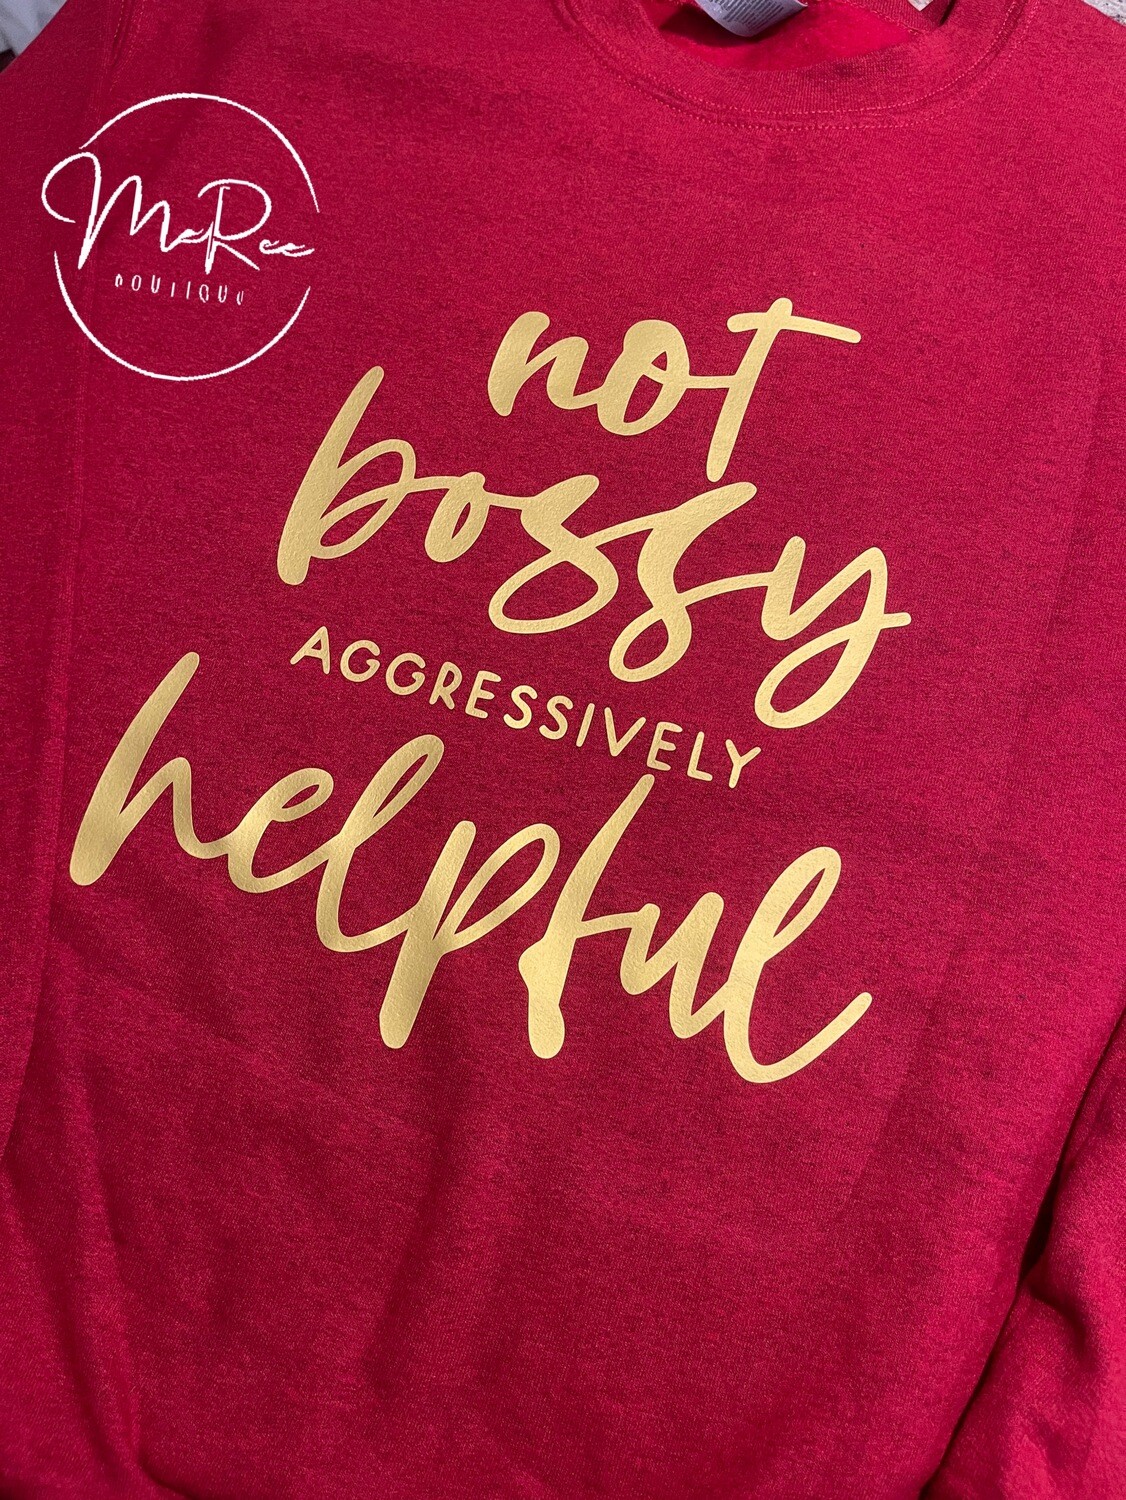 ❤️”Not Bossy” Shirt/Top 👉🏼Takes approx 2-6 days to ship from date of order.) *SHIPPING INCLUDED IN PRICE.⭐️